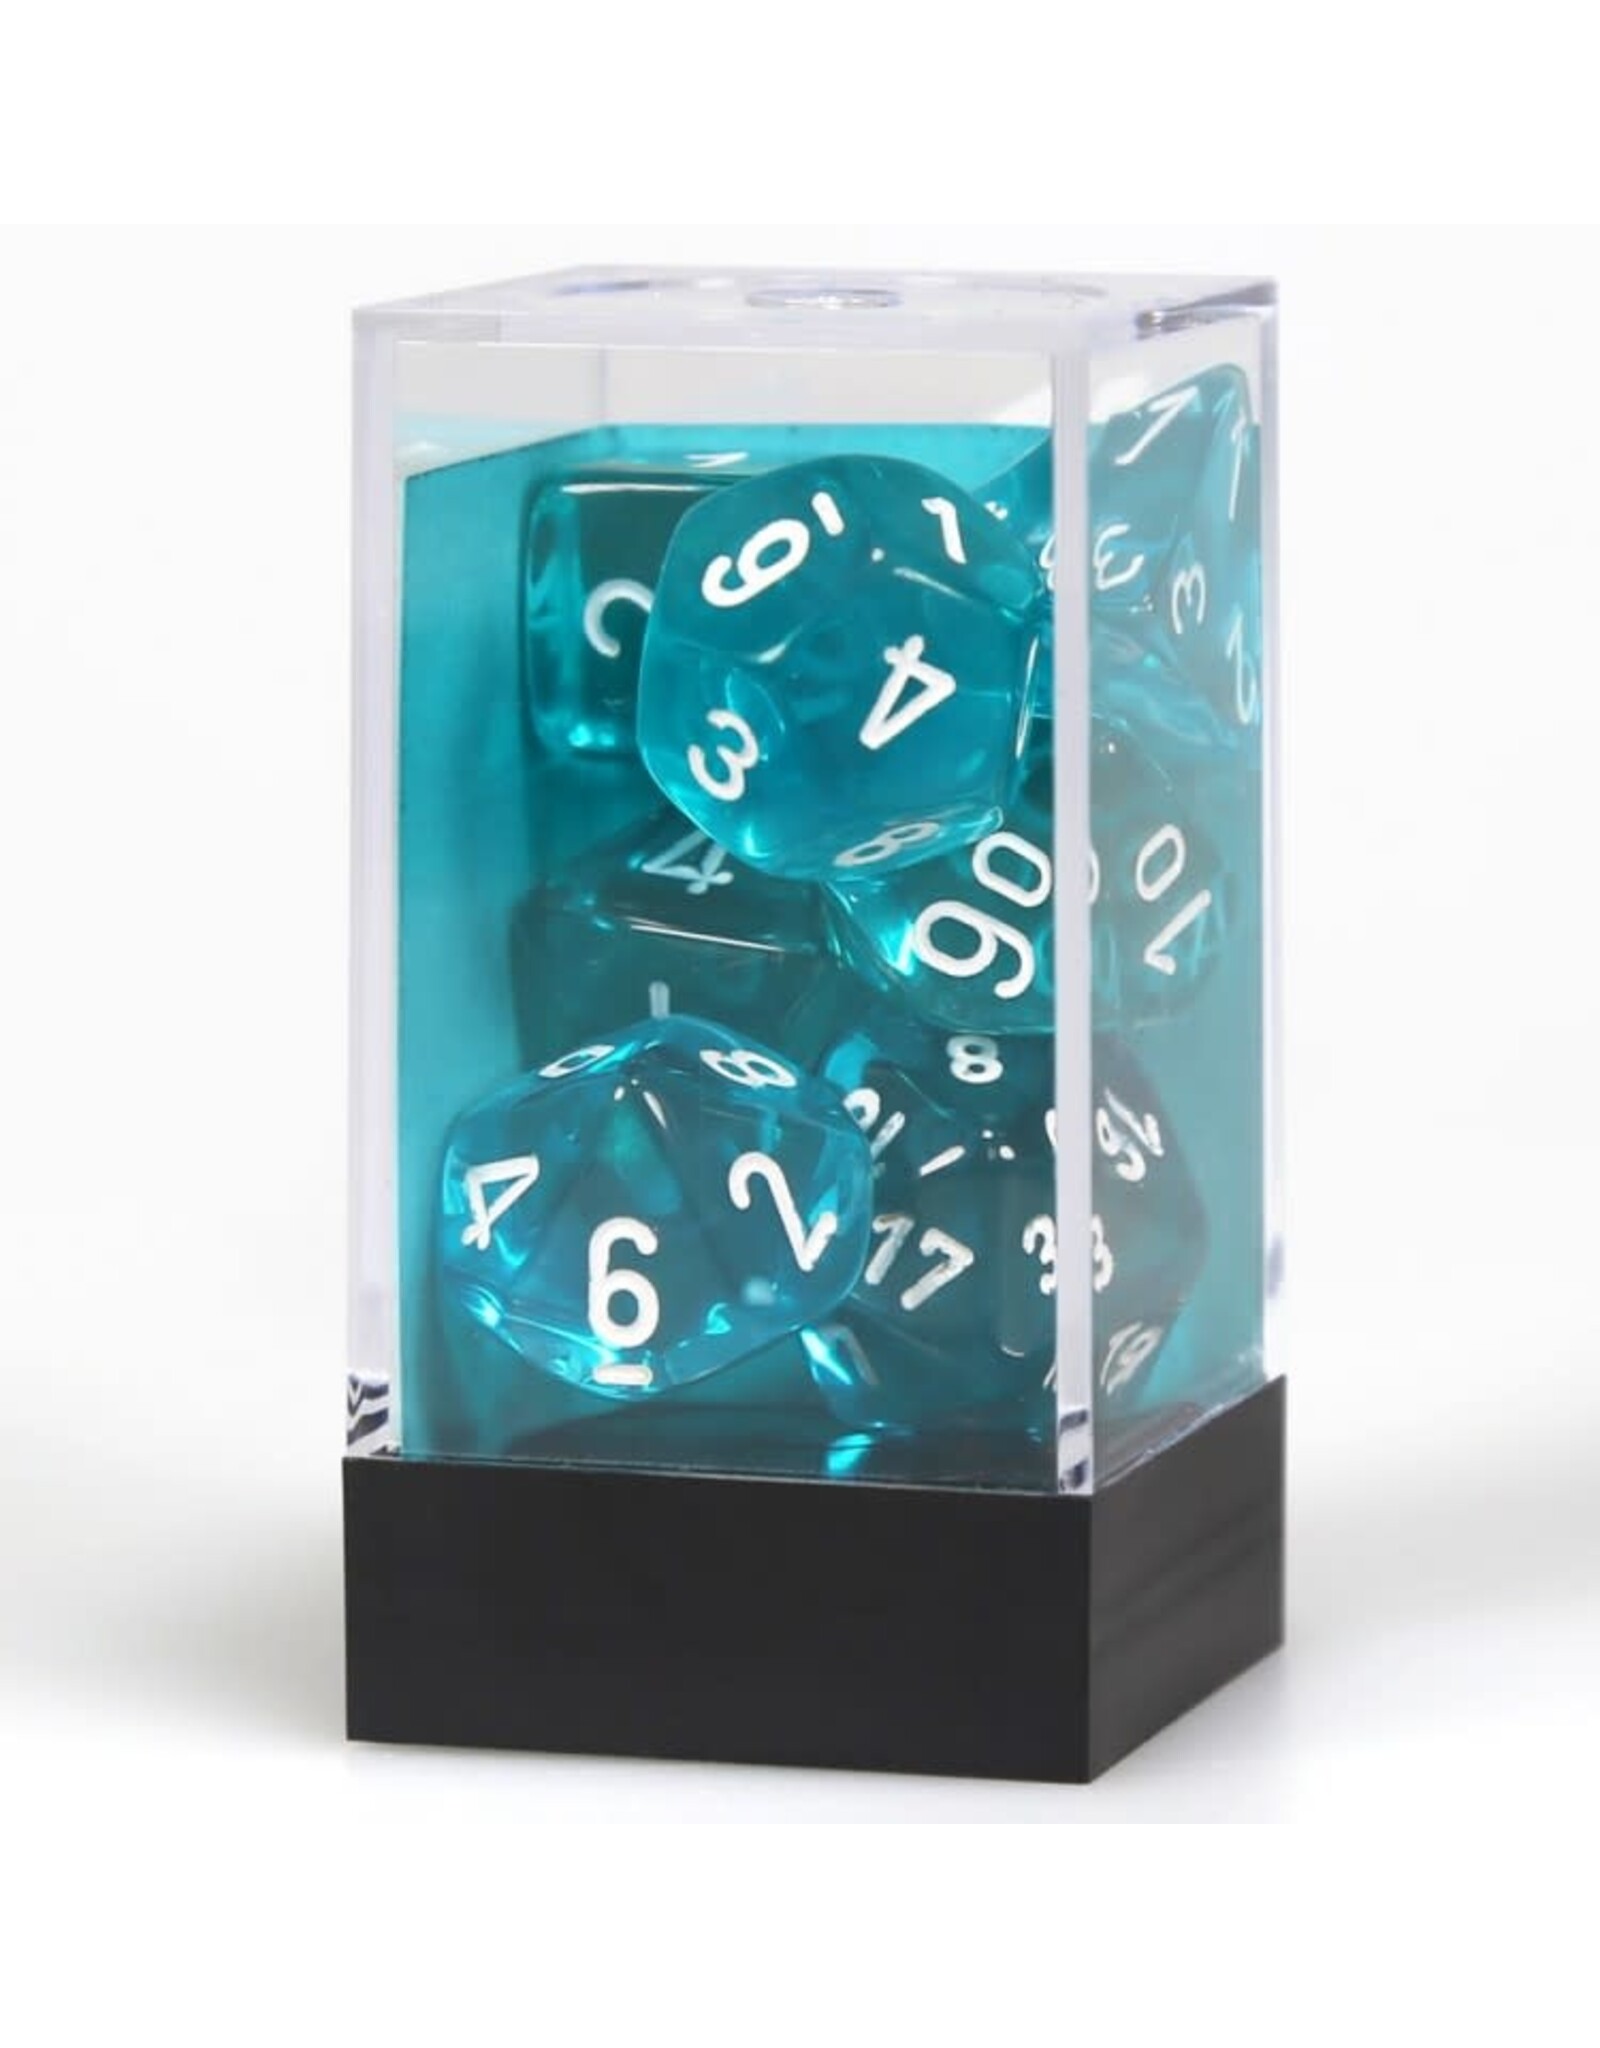 Chessex Teal/ white Translucent Poly 7 dice set